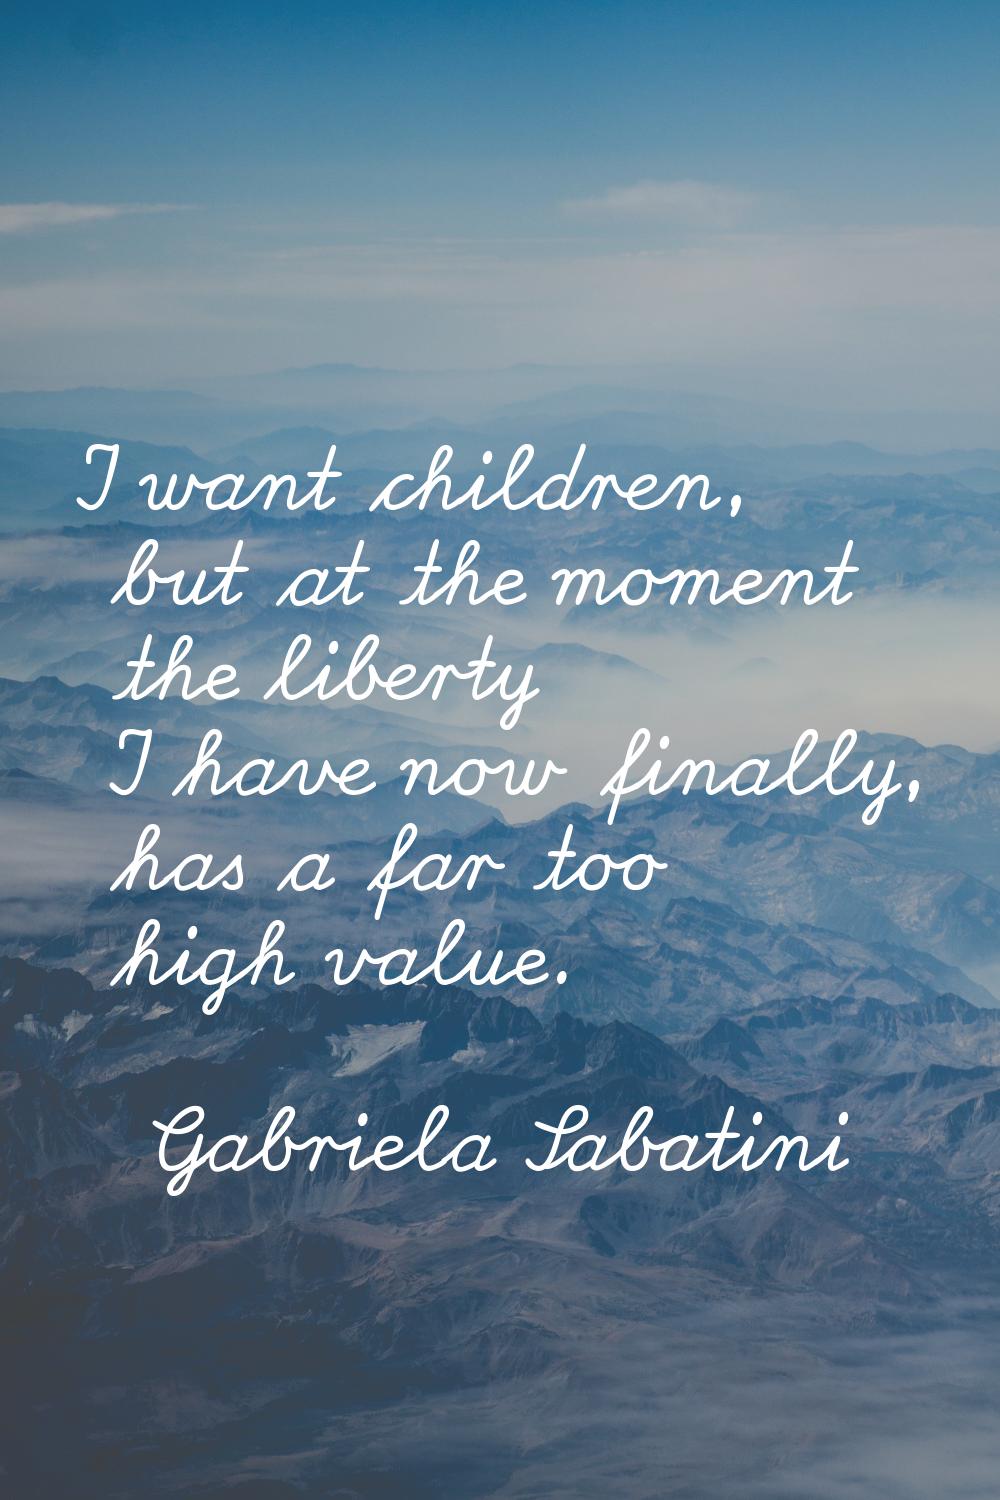 I want children, but at the moment the liberty I have now finally, has a far too high value.